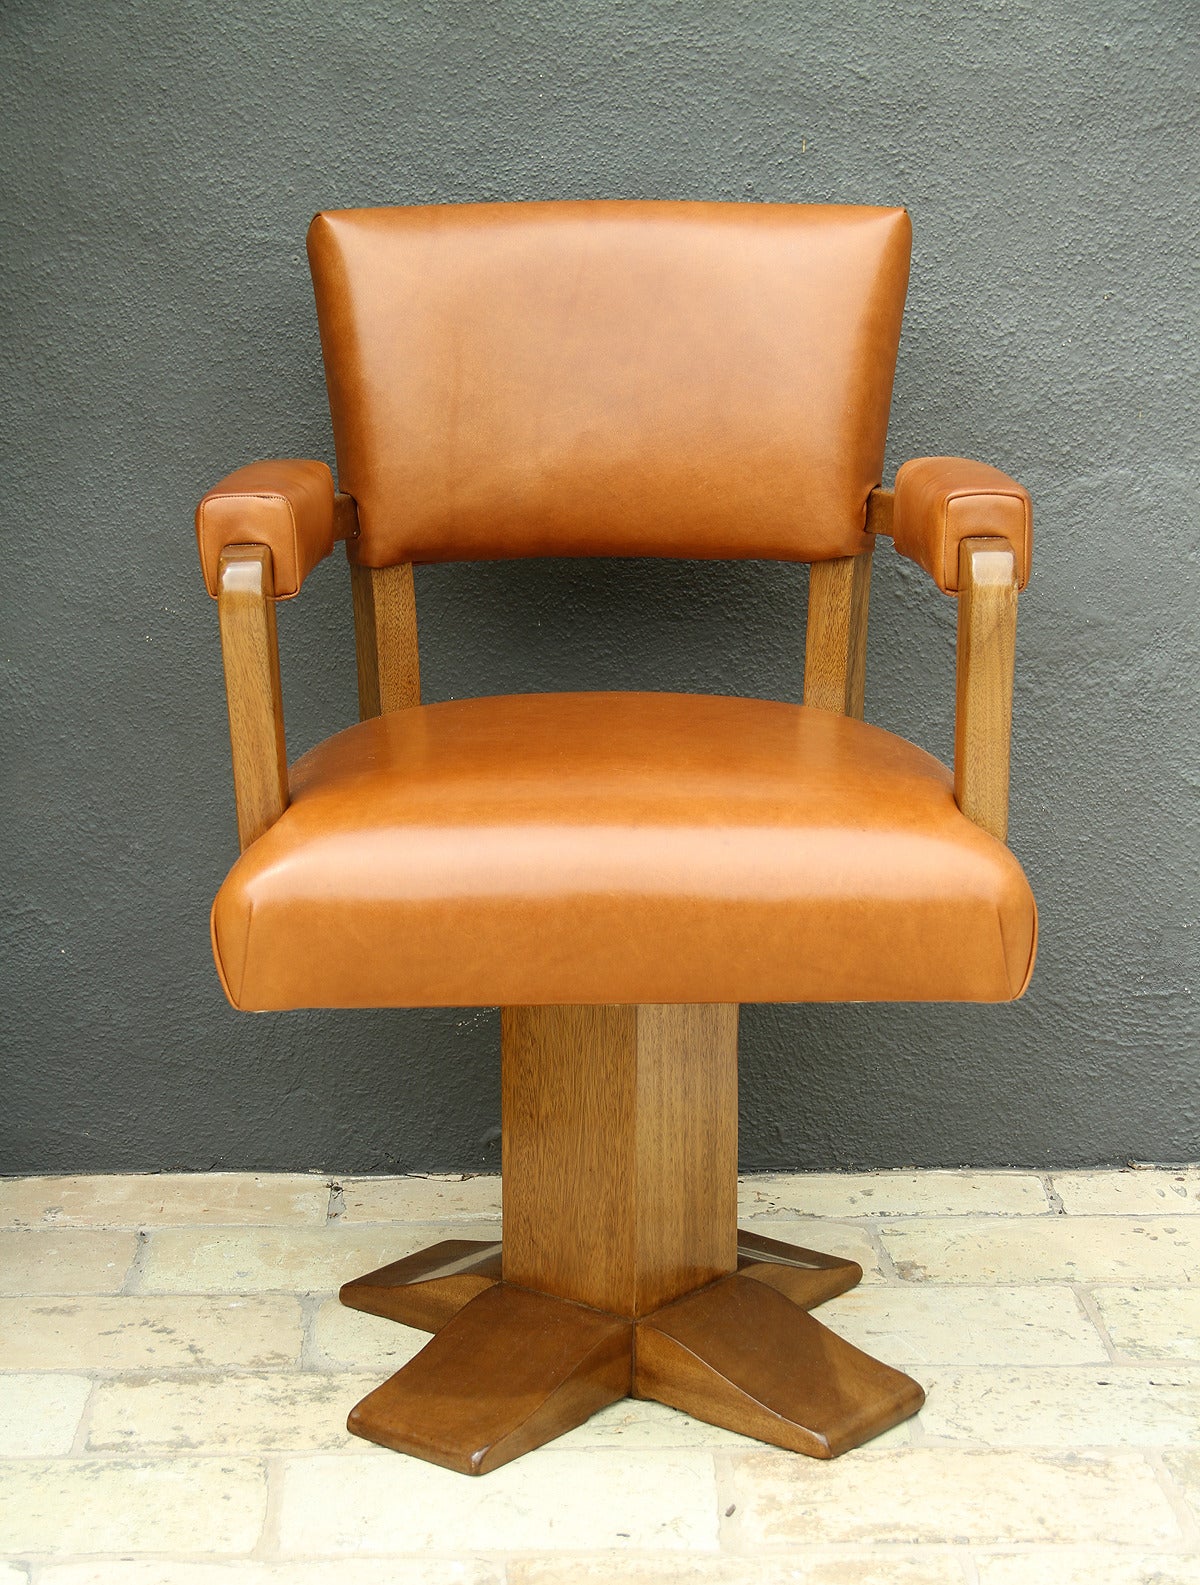 Rare swivel desk chair, France, 1940.
Base in walnut refinished in satin, upholstery in Camel/Cognac leather.
The chair can be swivel but originally the chair had a screw to get the seat static.
The screw has been taken off but can be easily